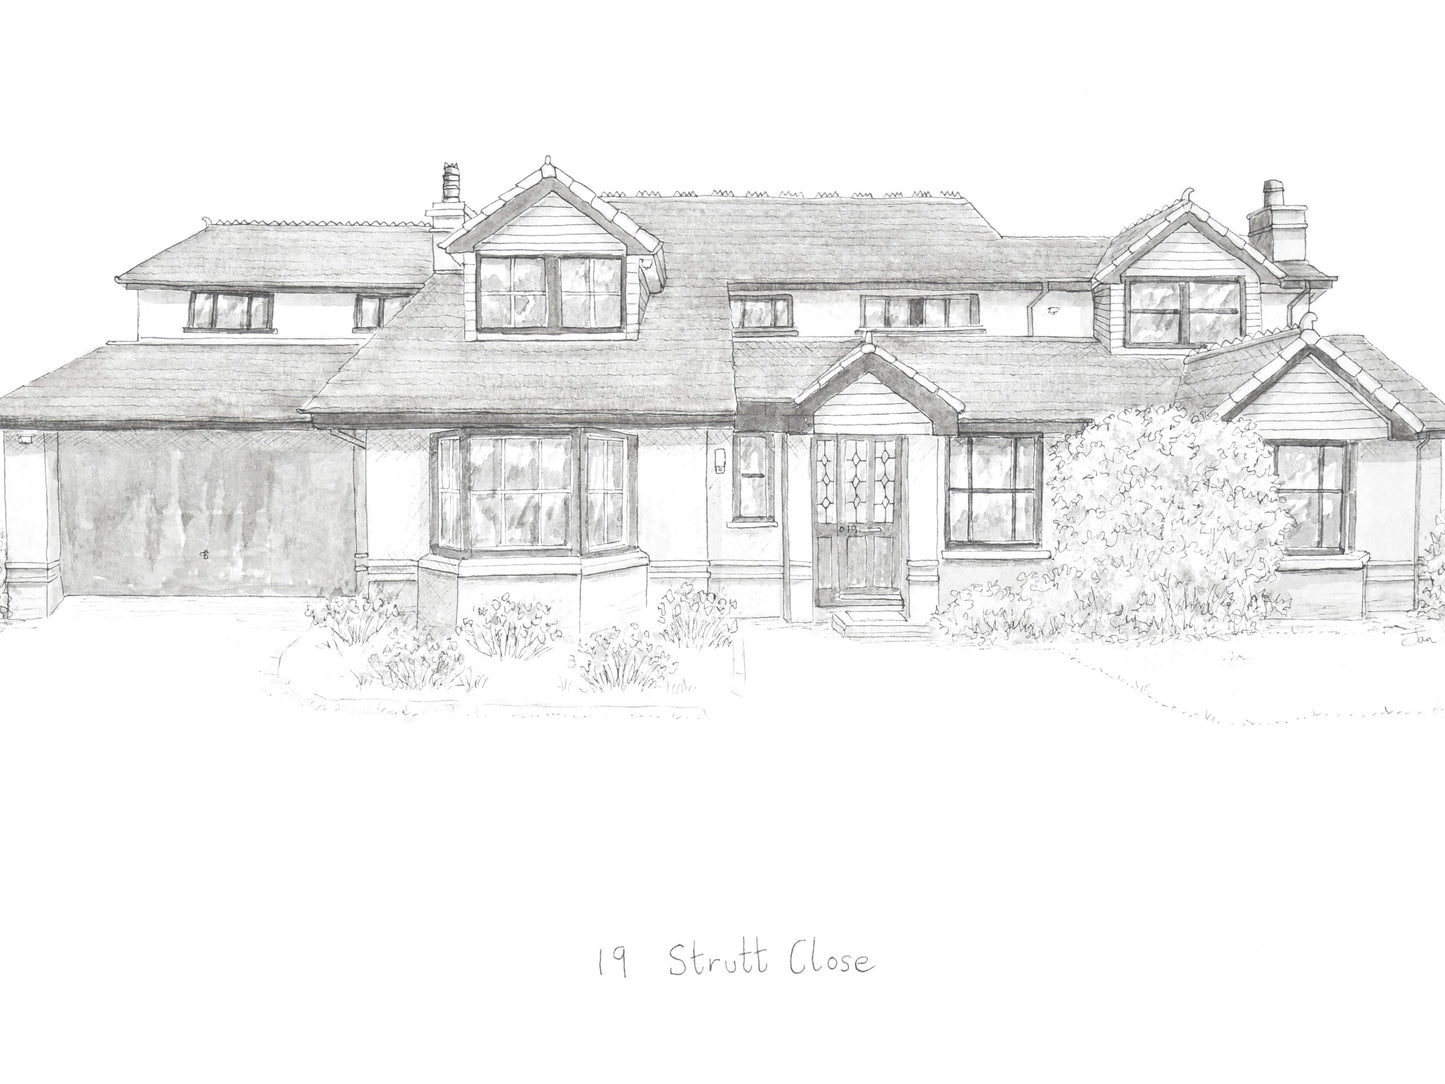 Large detached house painted in pen and ink